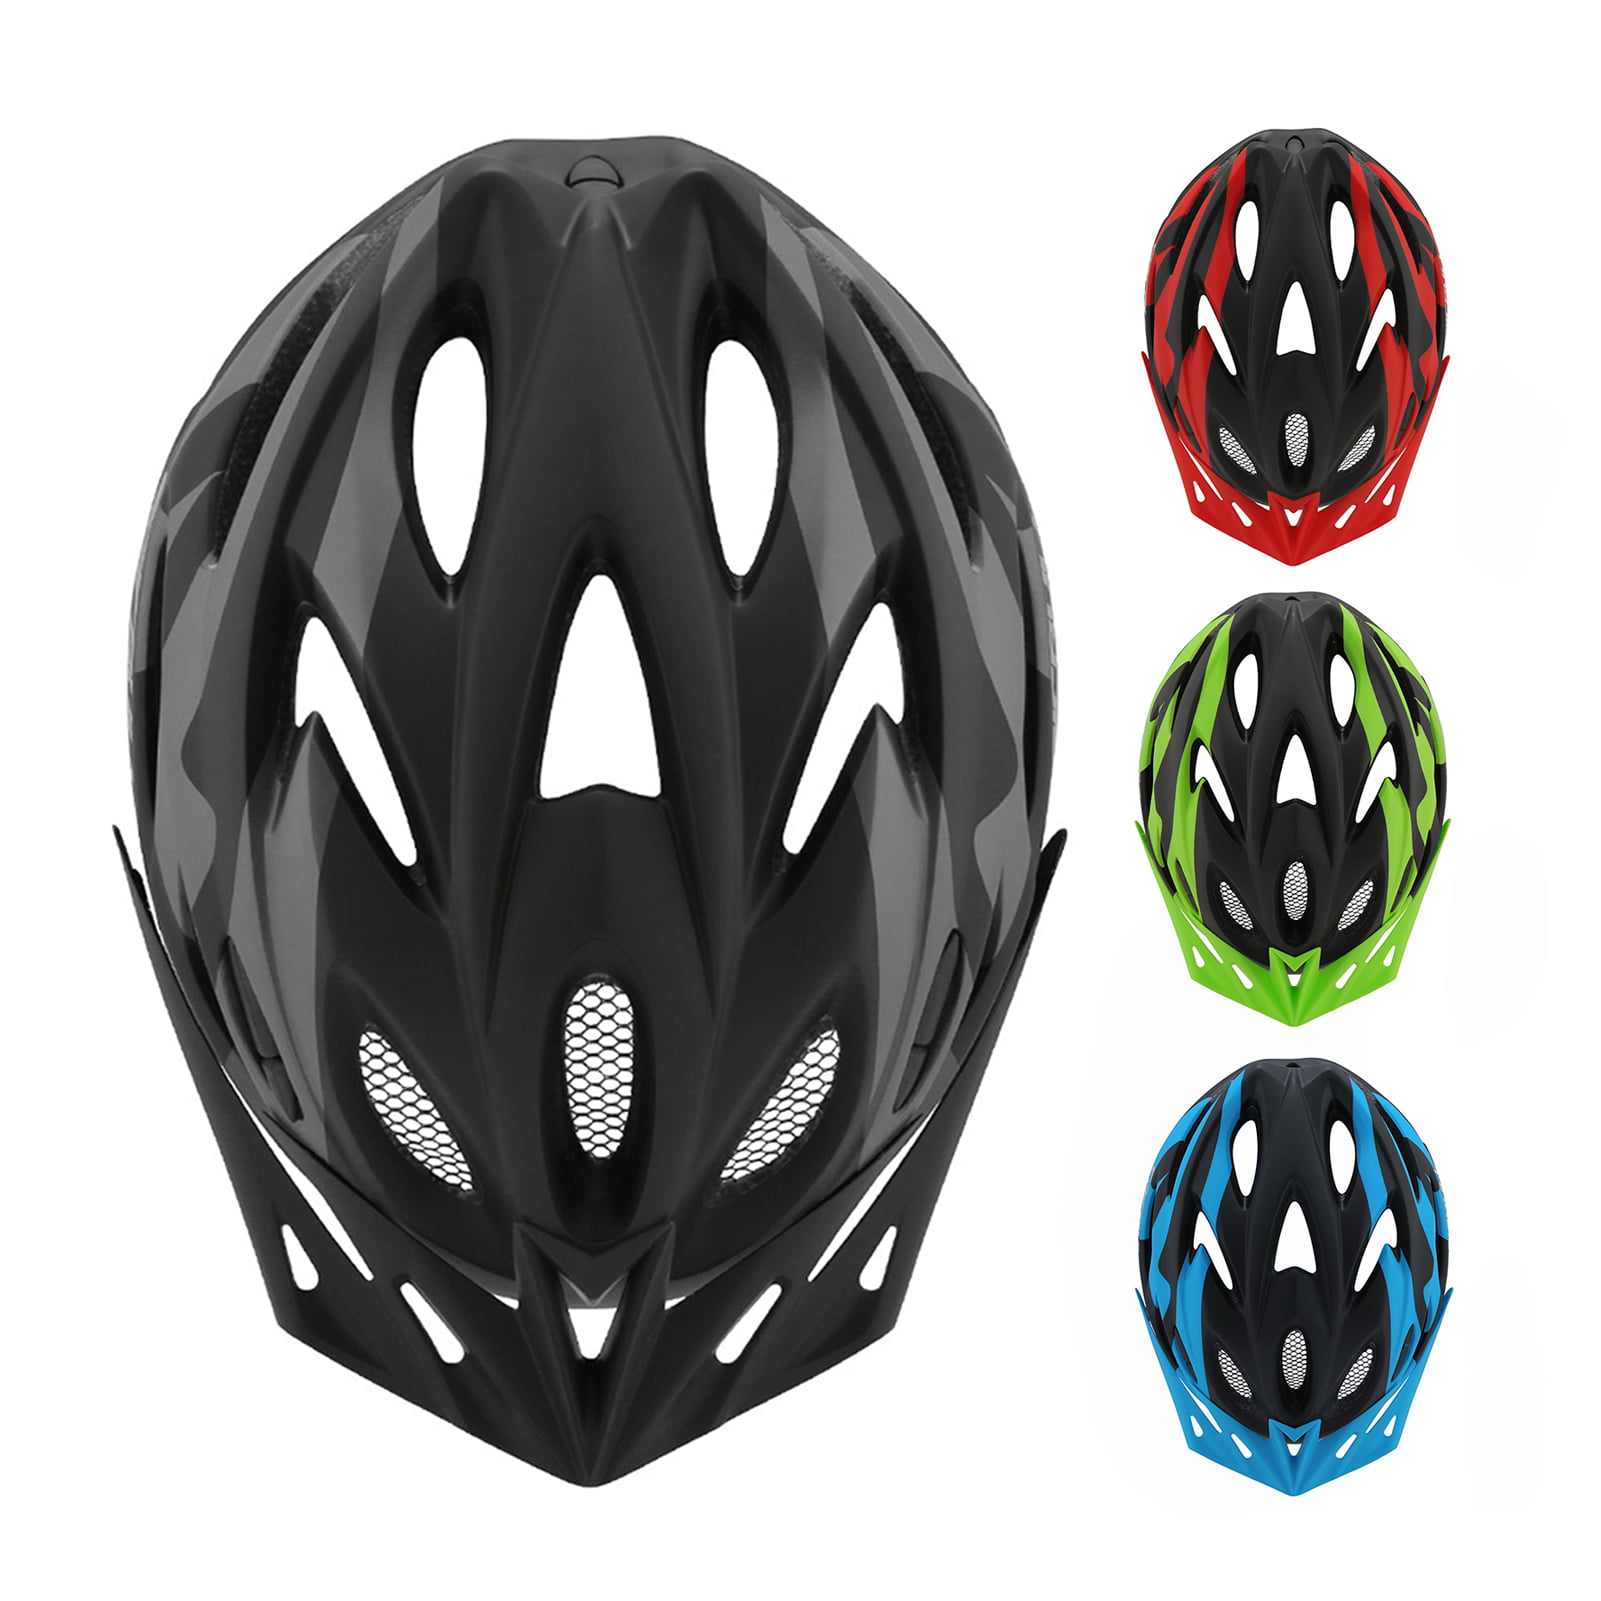 Details about   MTB Mountain Bike Helmet Adjustable Lightweight & Breathable Cycle Adult Safety 